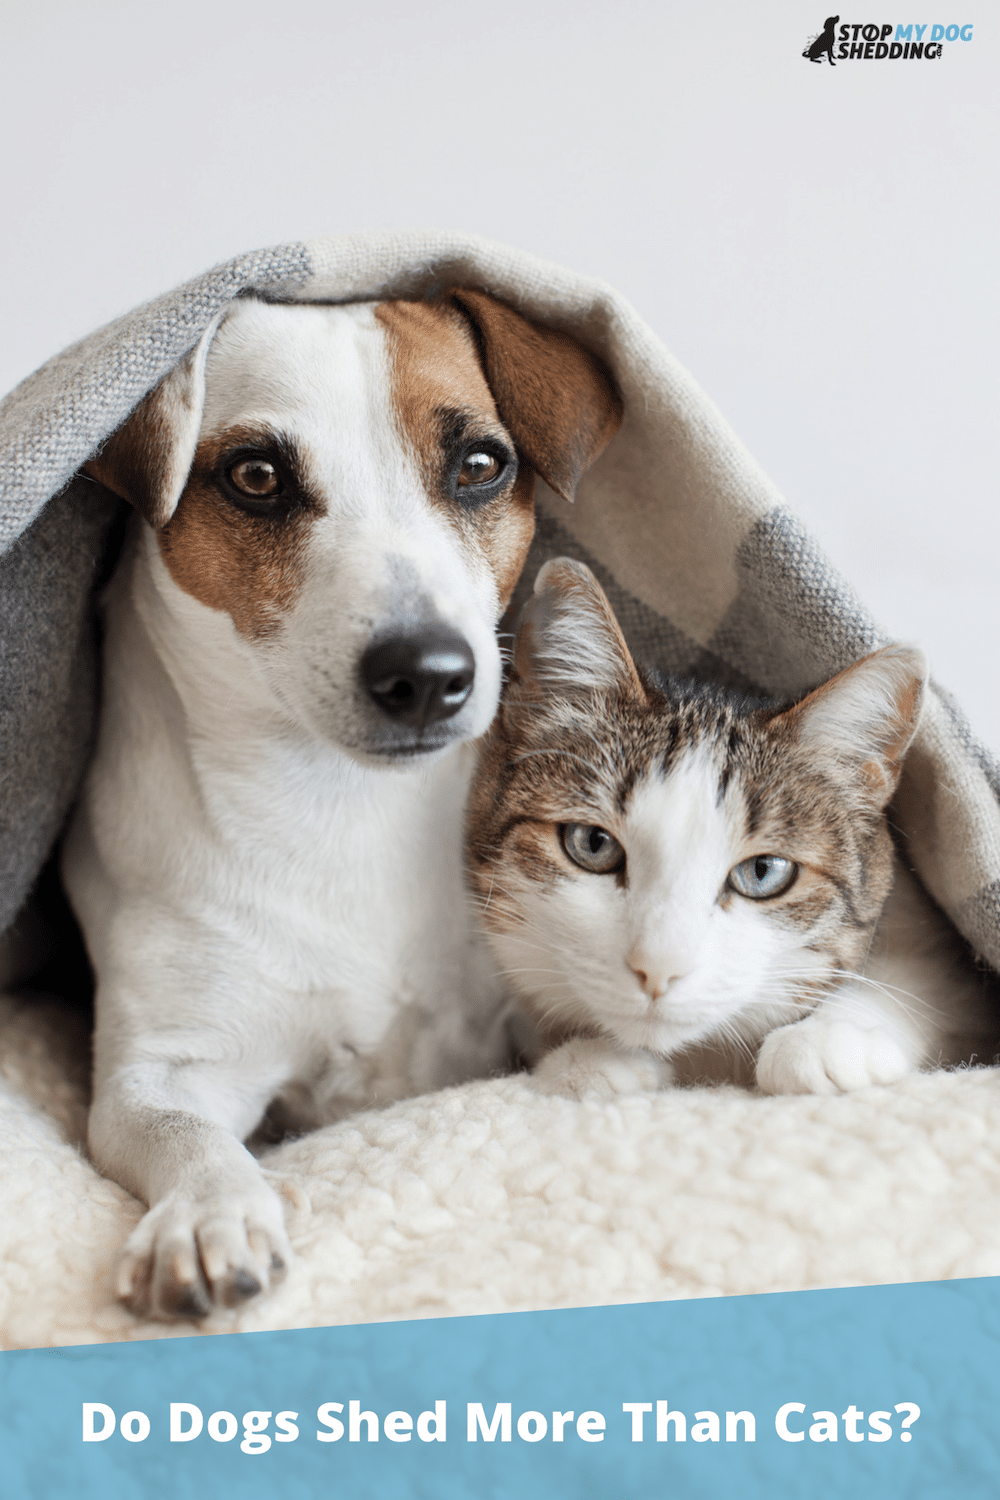 Do Dogs Shed More Than Cats? (Dog vs. Cat Shedding Guide)